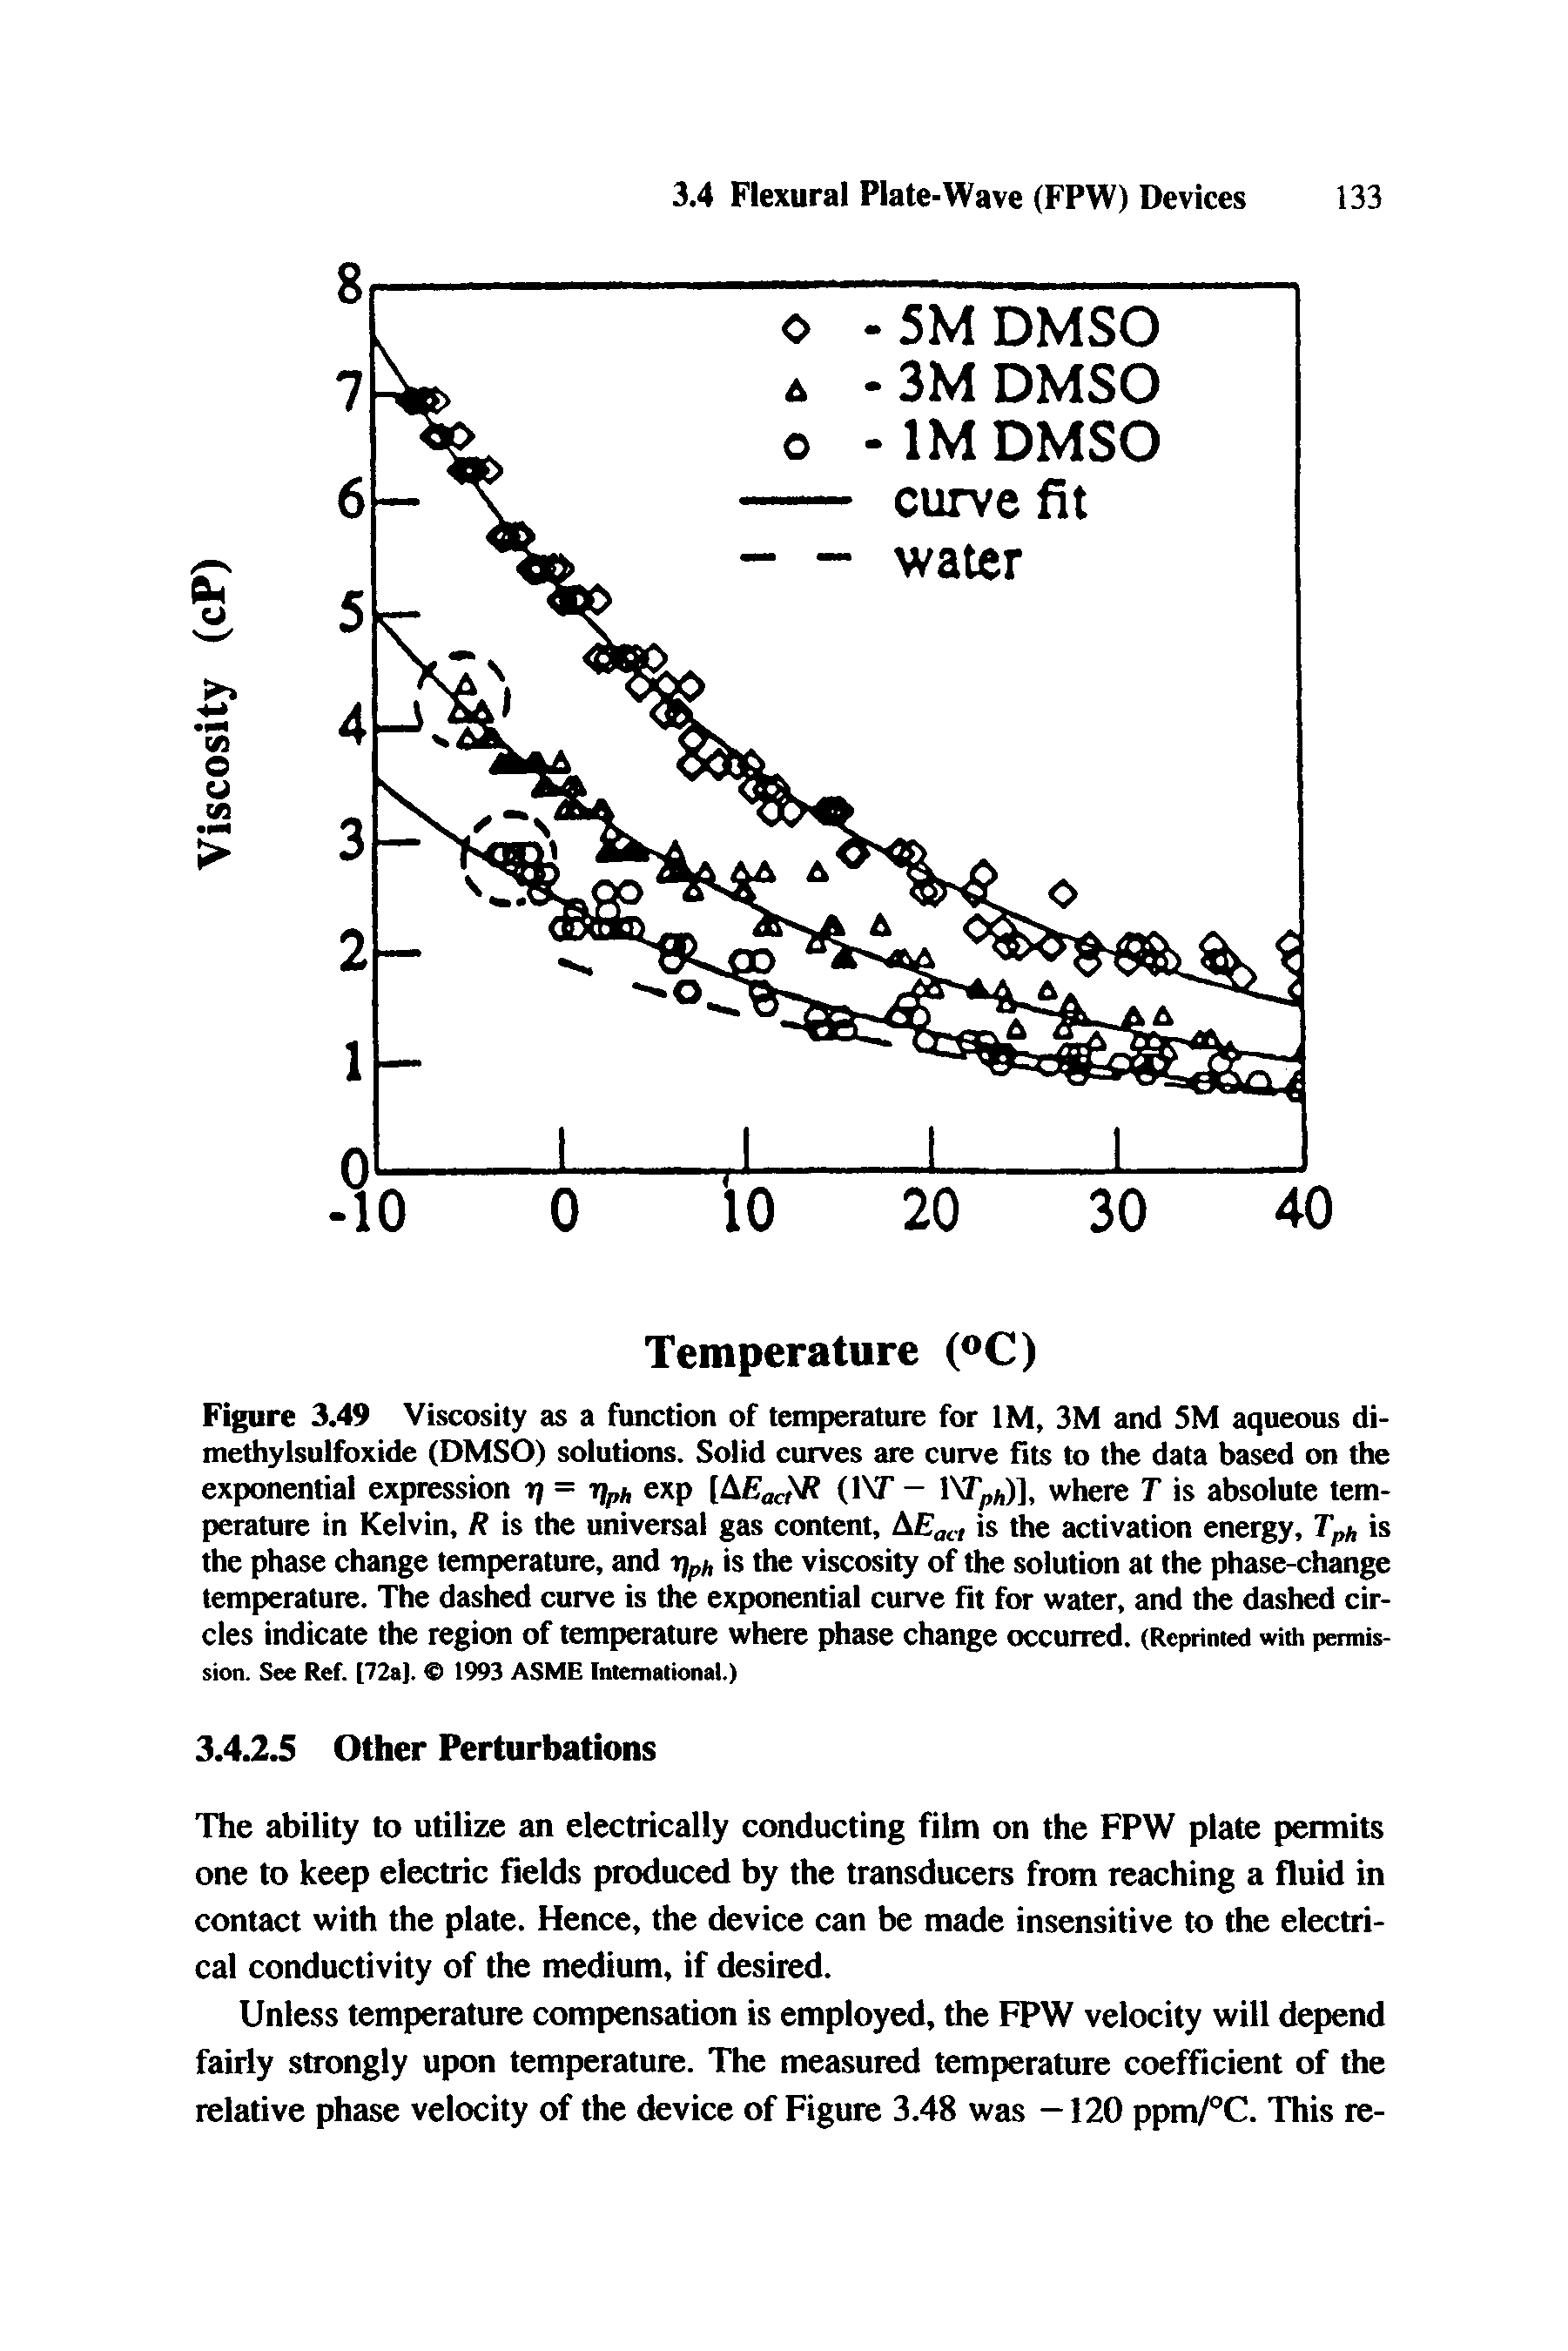 Figure 3.49 Viscosity as a function of temperature for IM, 3M and SM aqueous di-methylsulfoxide (DMSO) solutions. Solid curves are curve fits to the data ba on the exponential expression tj = tj, exp [ACocf (IVT - INT )], where T is absolute temperature in Kelvin, R is the universal gas content, A o is the activation energy, Tp is the phase change temperature, and r)pi, is the viscosity of the solution at the phase-change temperature. The dashed curve is the exponential curve fit for water, and the dashed circles indicate the region of temperature where phase change occurred. (Reprinted with pennis-sion. See Ref. [72aJ. 1993 ASME International.)...